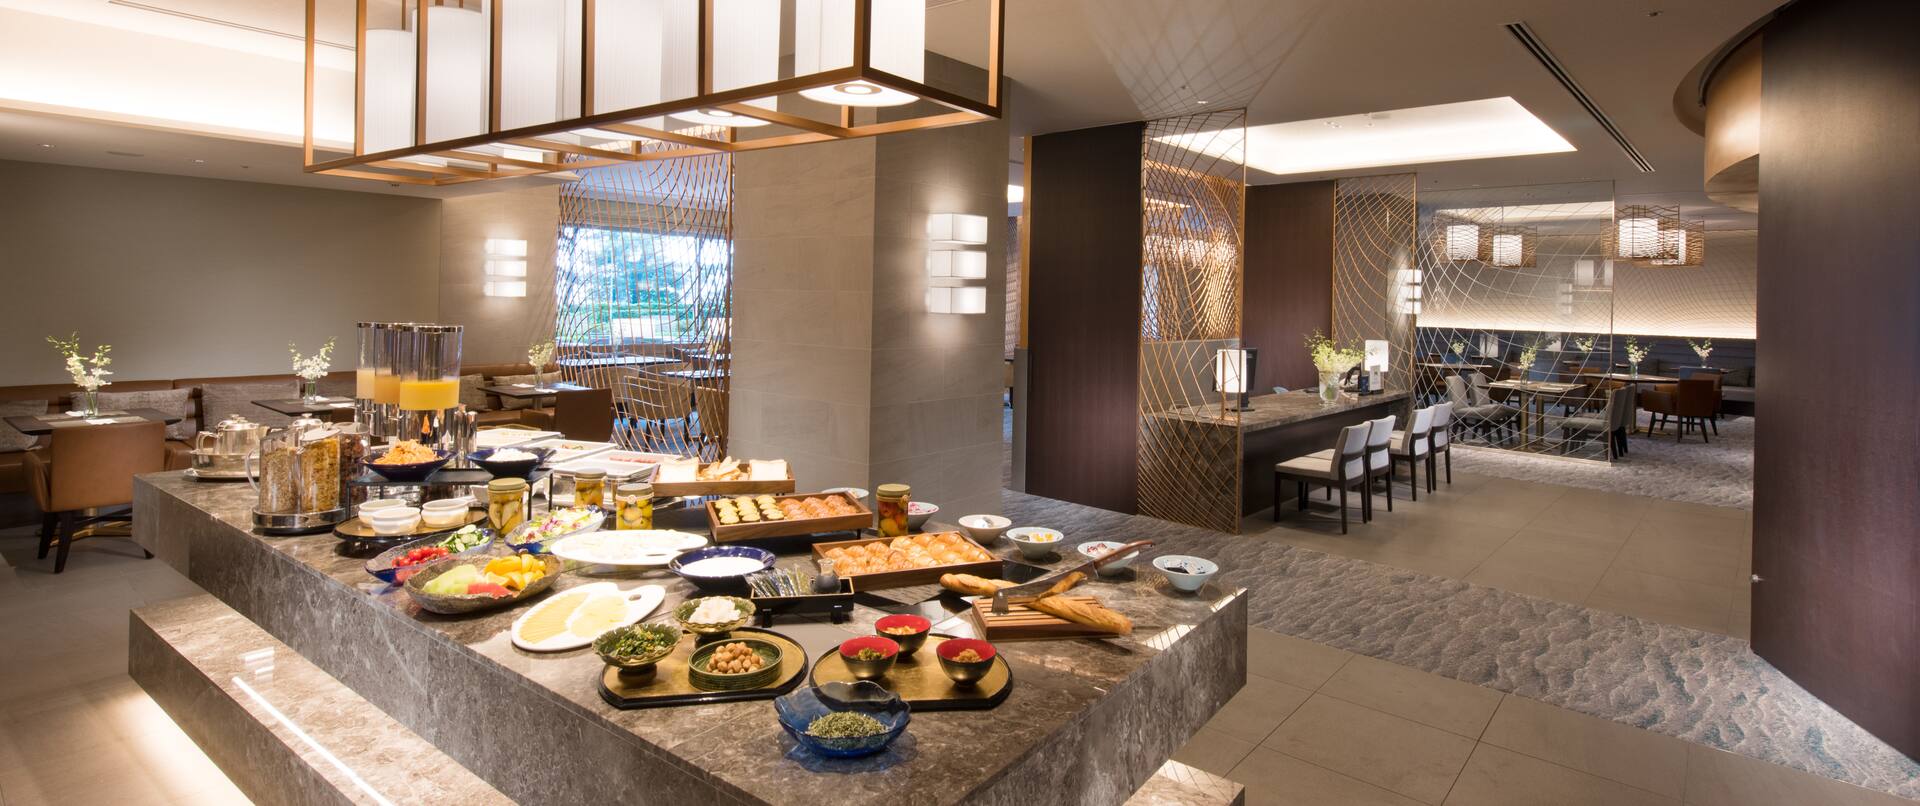 Food on Counter of Celebrio Lounge and Seating Area